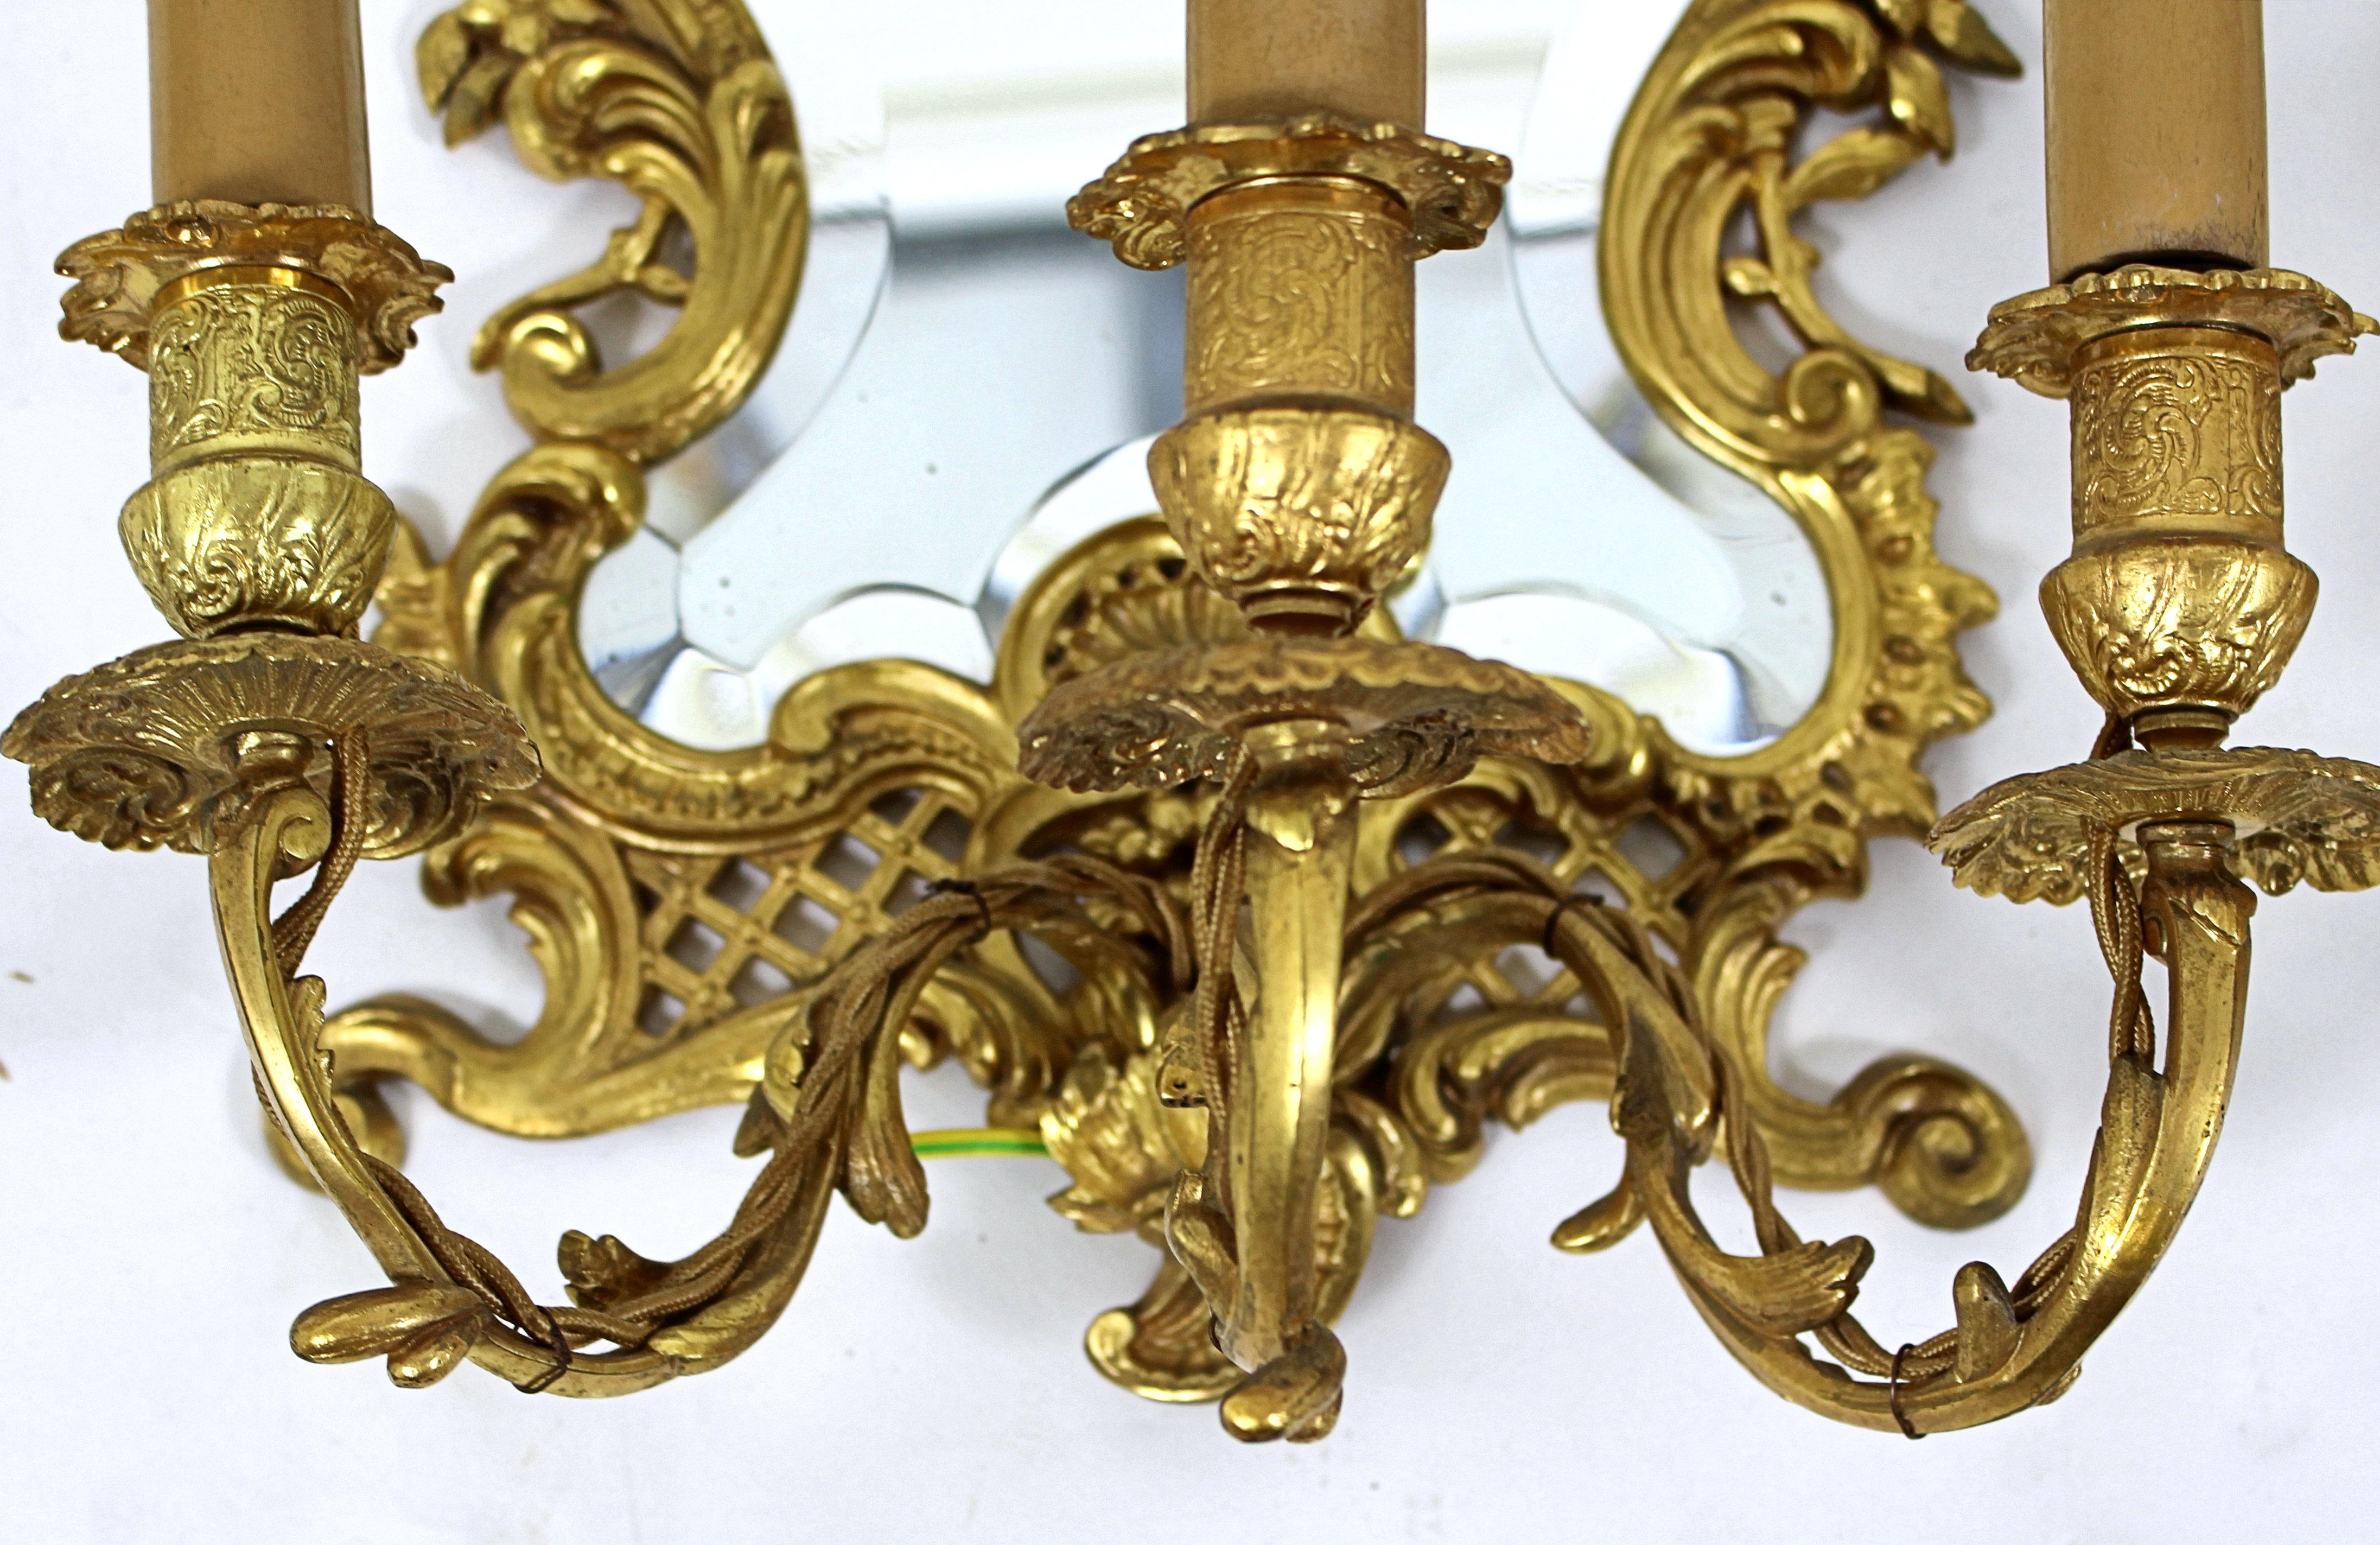 Mirror Pair of 19th Century French Ormolu Girondelles For Sale